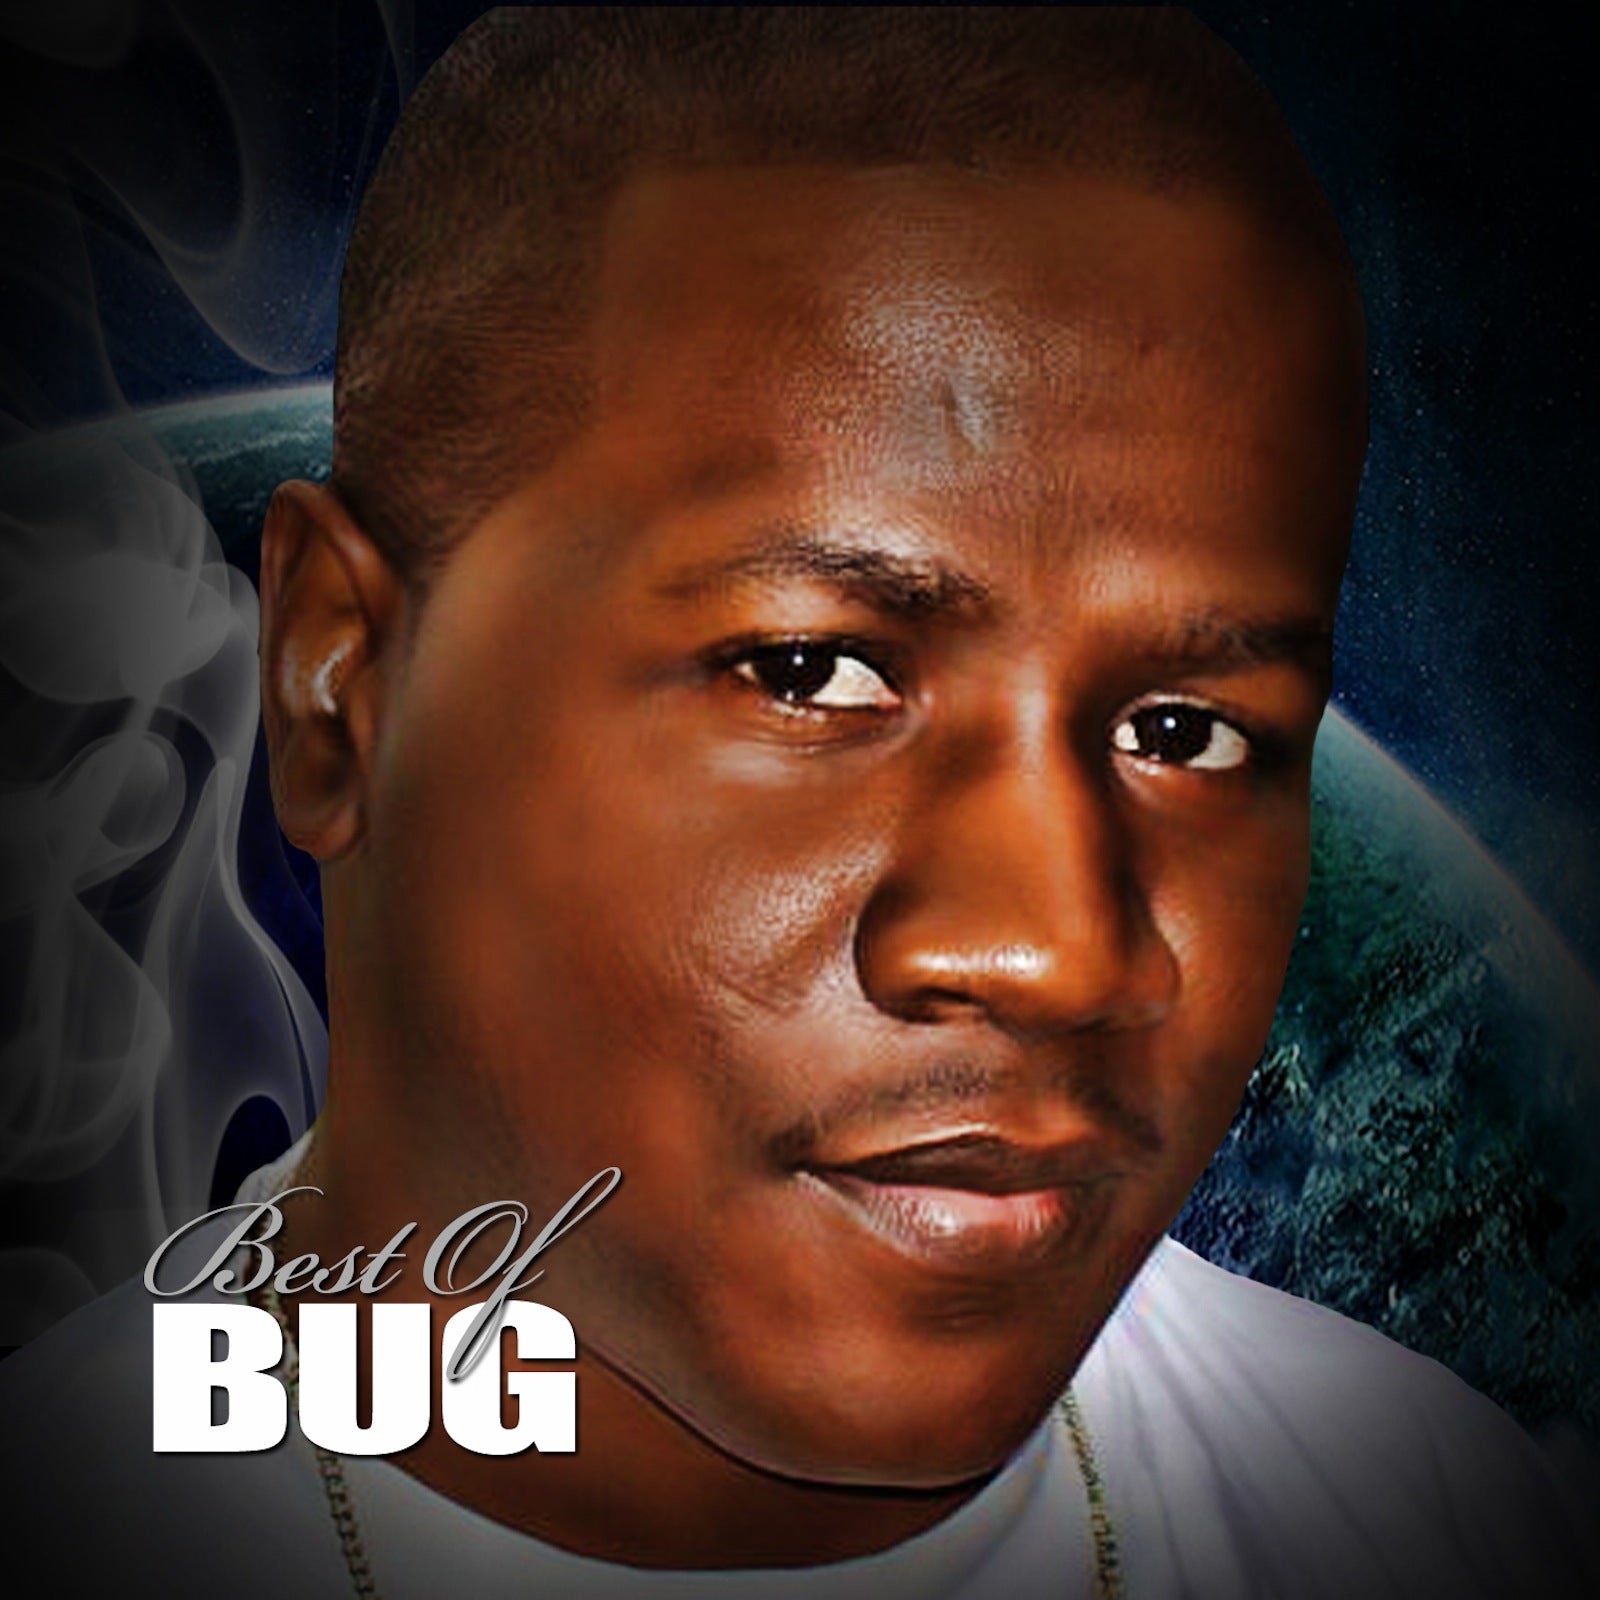 Best of BUG (Audio CD) by BUG